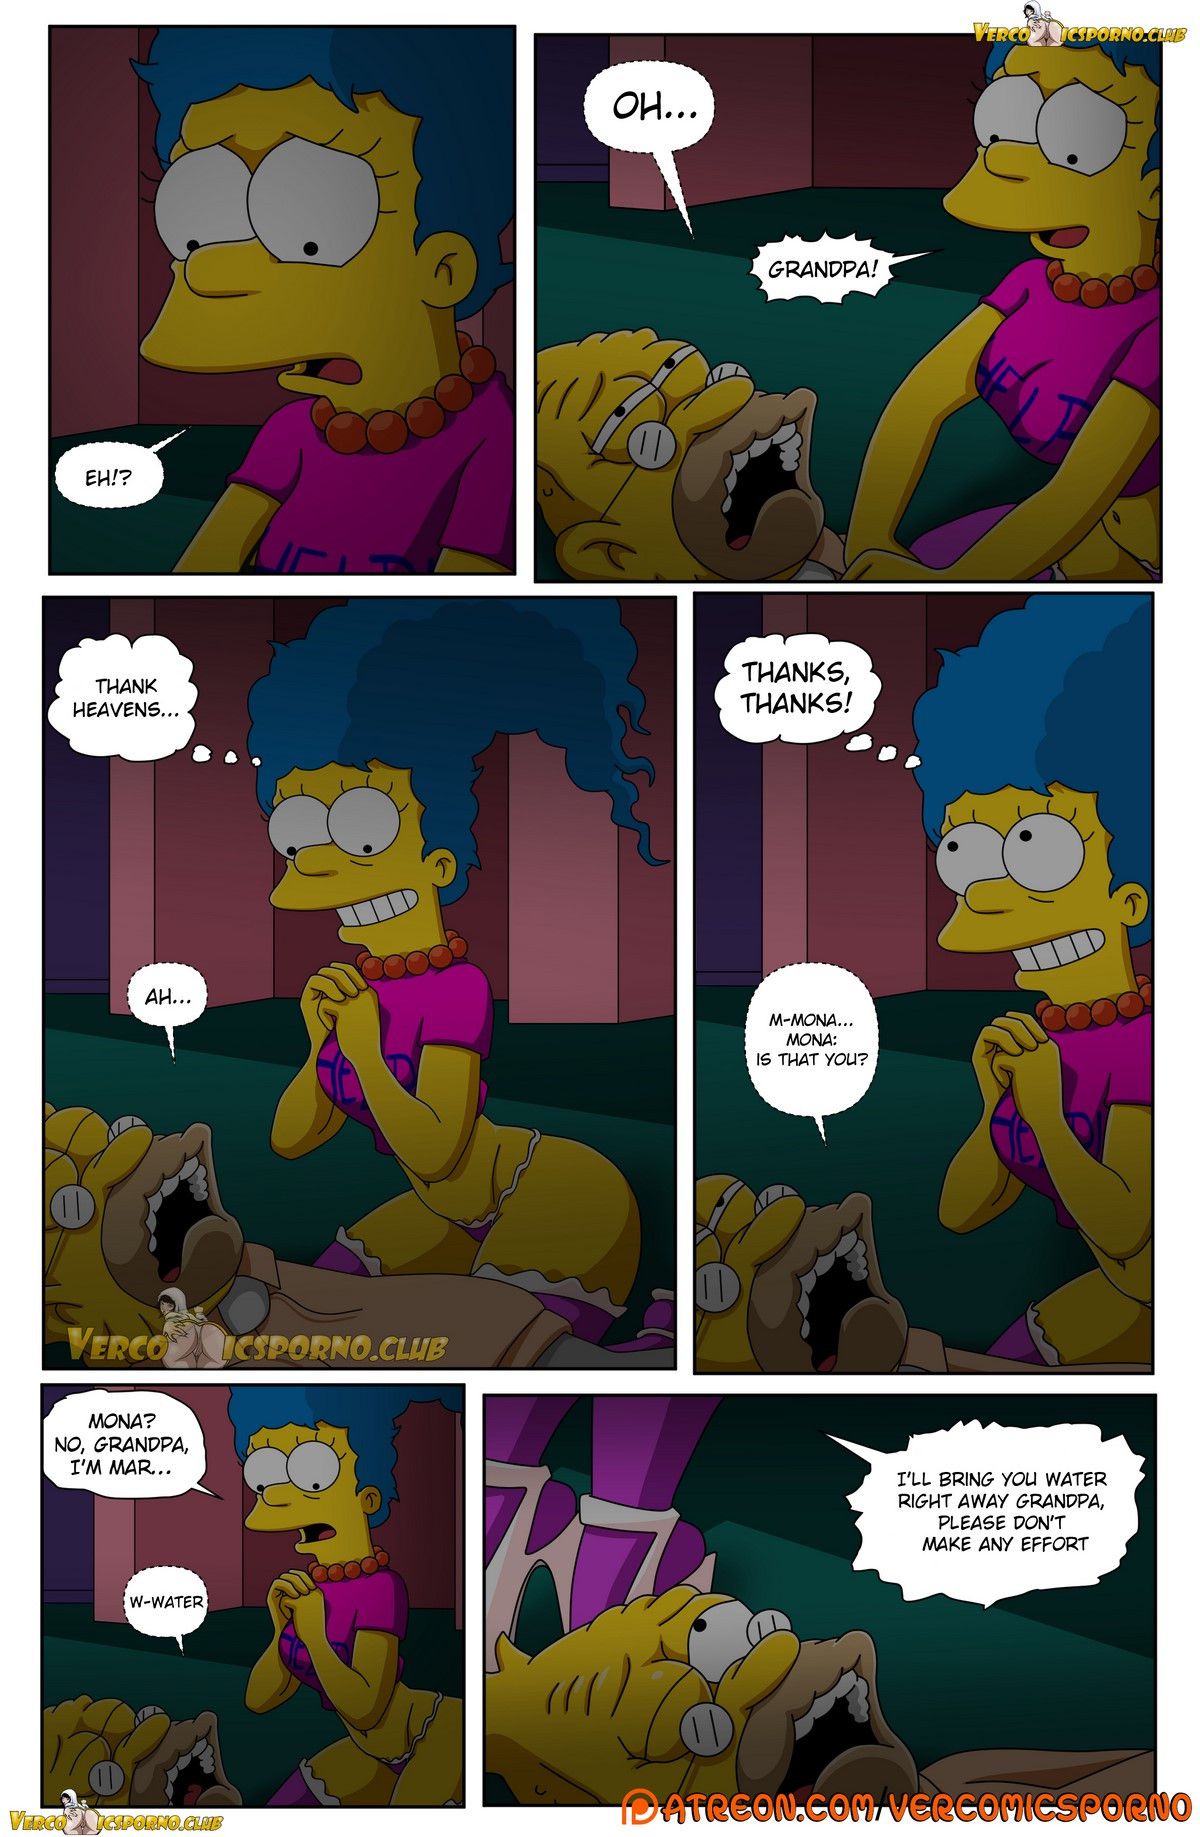 Grandpa and me - [Itooneaxxx] - [Drah Navlag] - [VCP] - [The Simpsons] 60